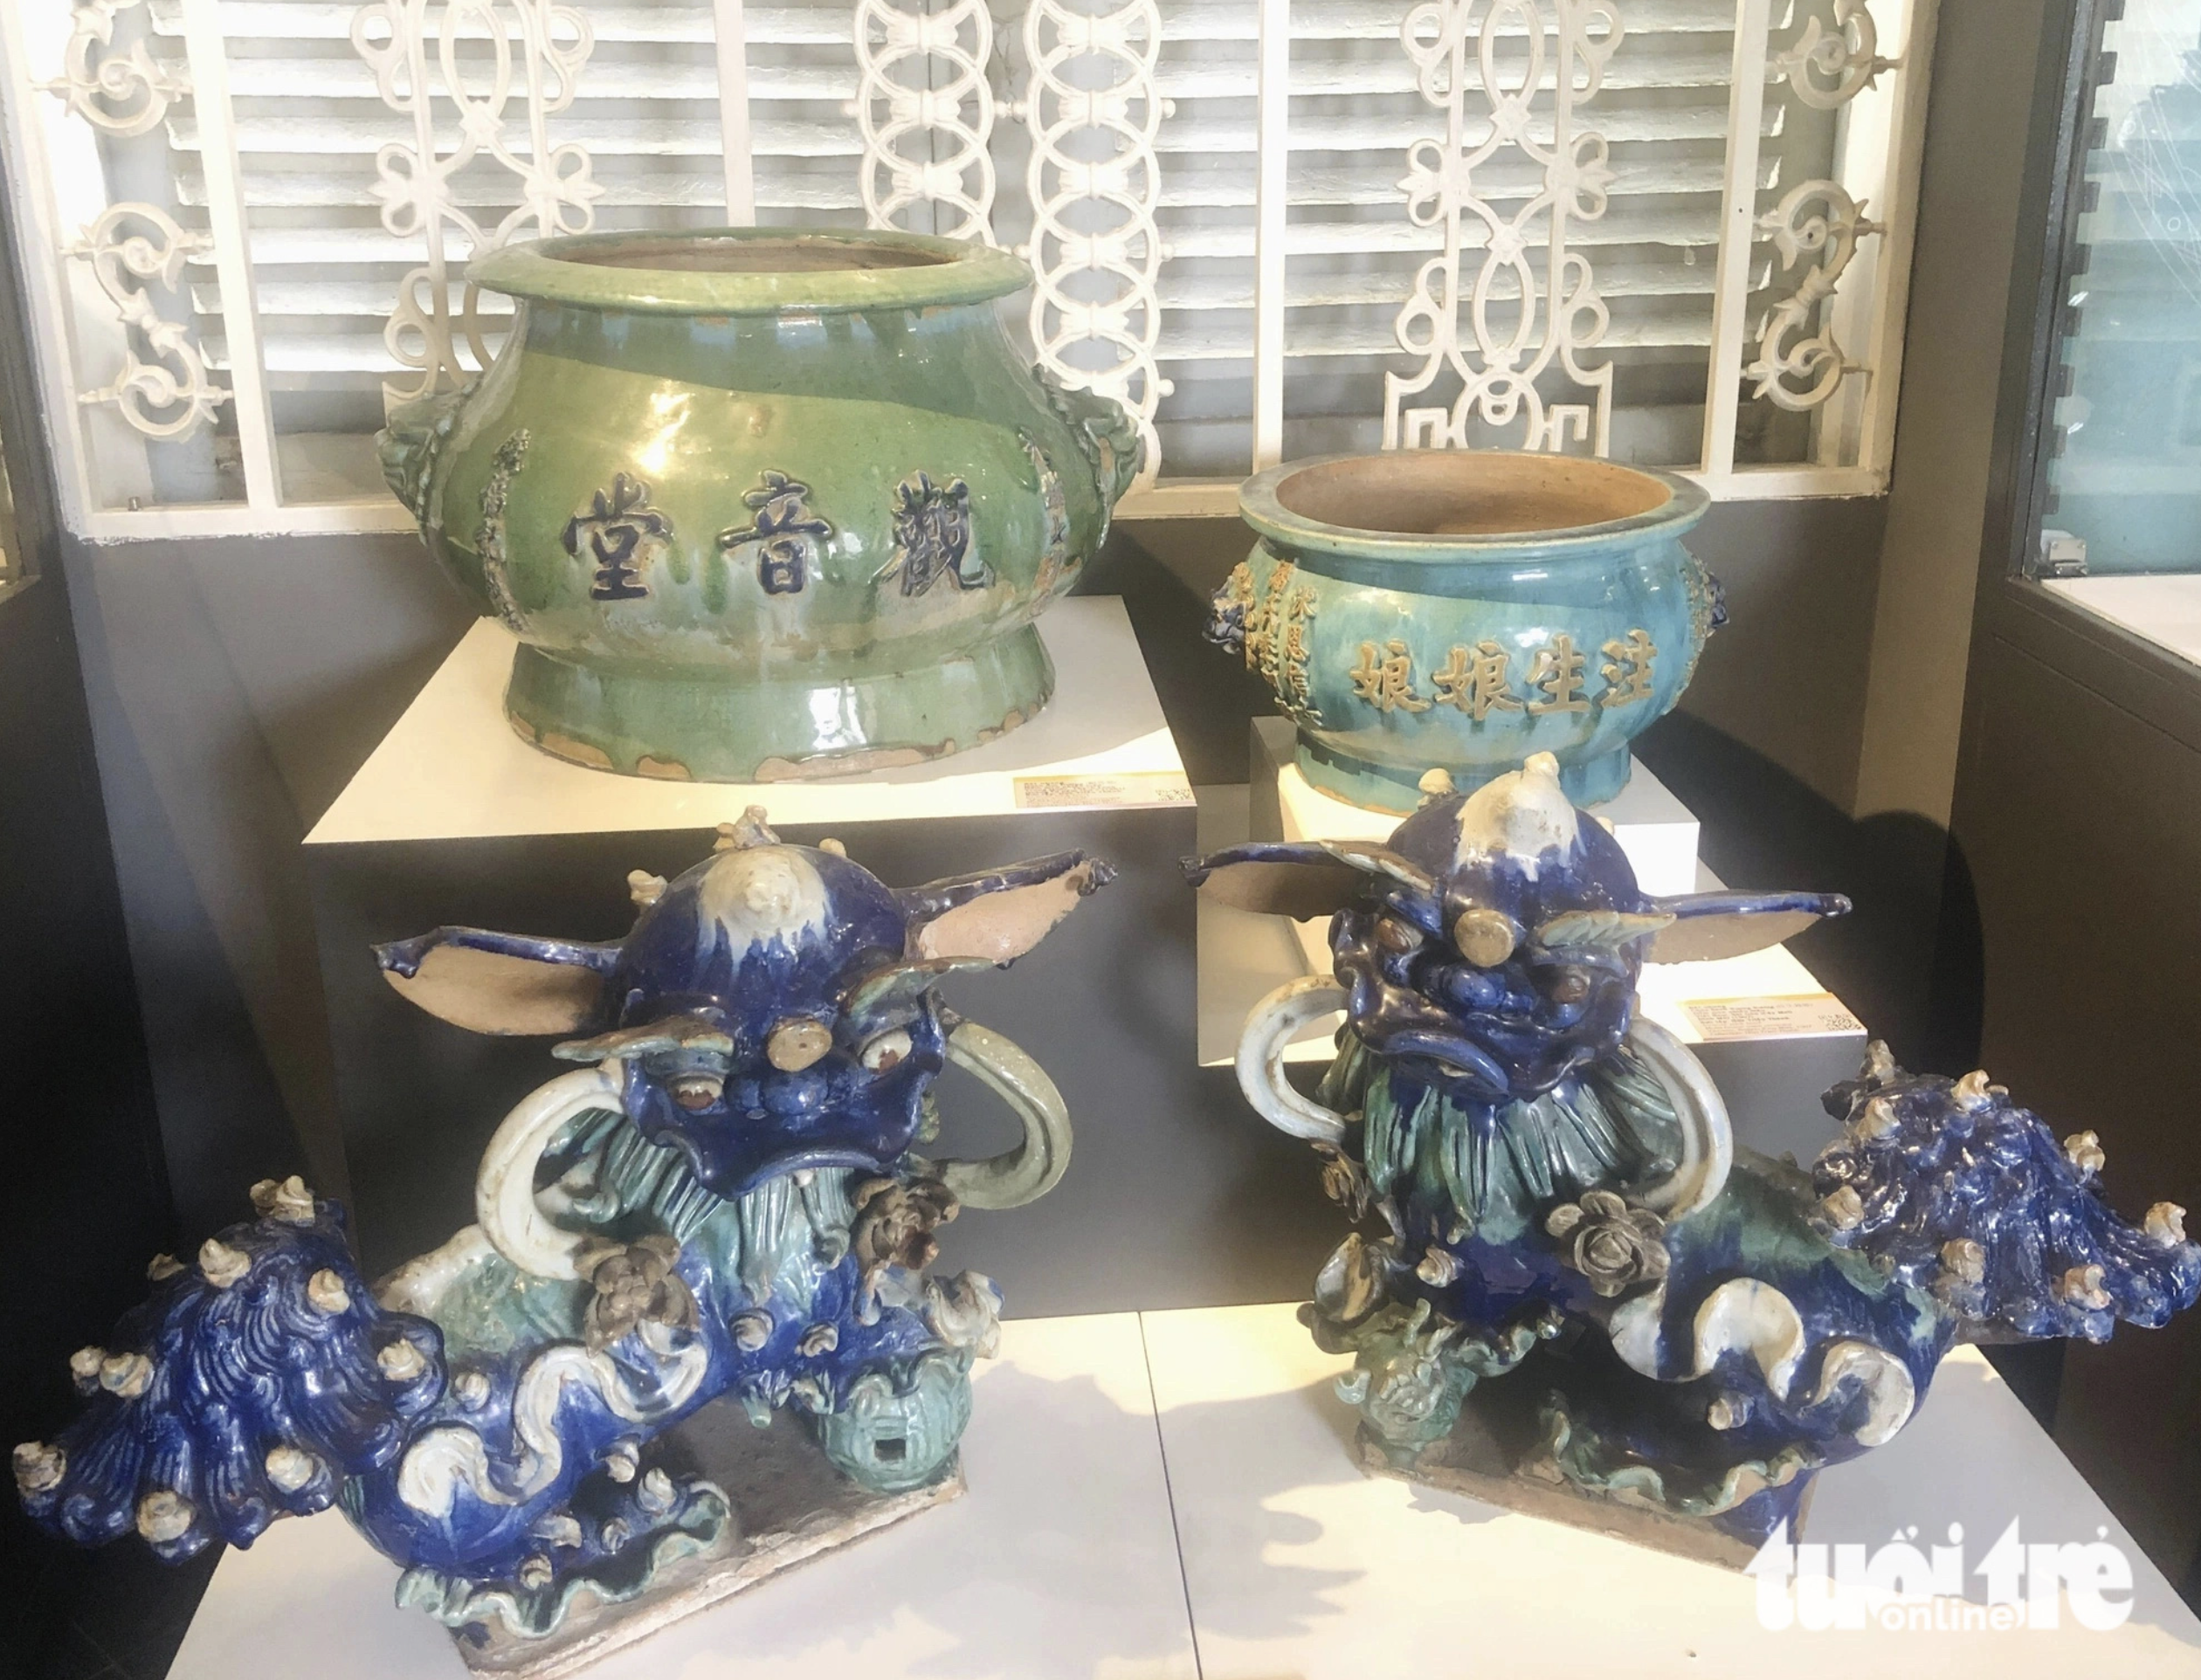 A pair of ceramic unicorns inlaid with bright enamels produced in the 20th century is being showcased at an exhibition at the Museum of Ho Chi Minh City in District 1. Photo: Hoai Phuong / Tuoi Tre